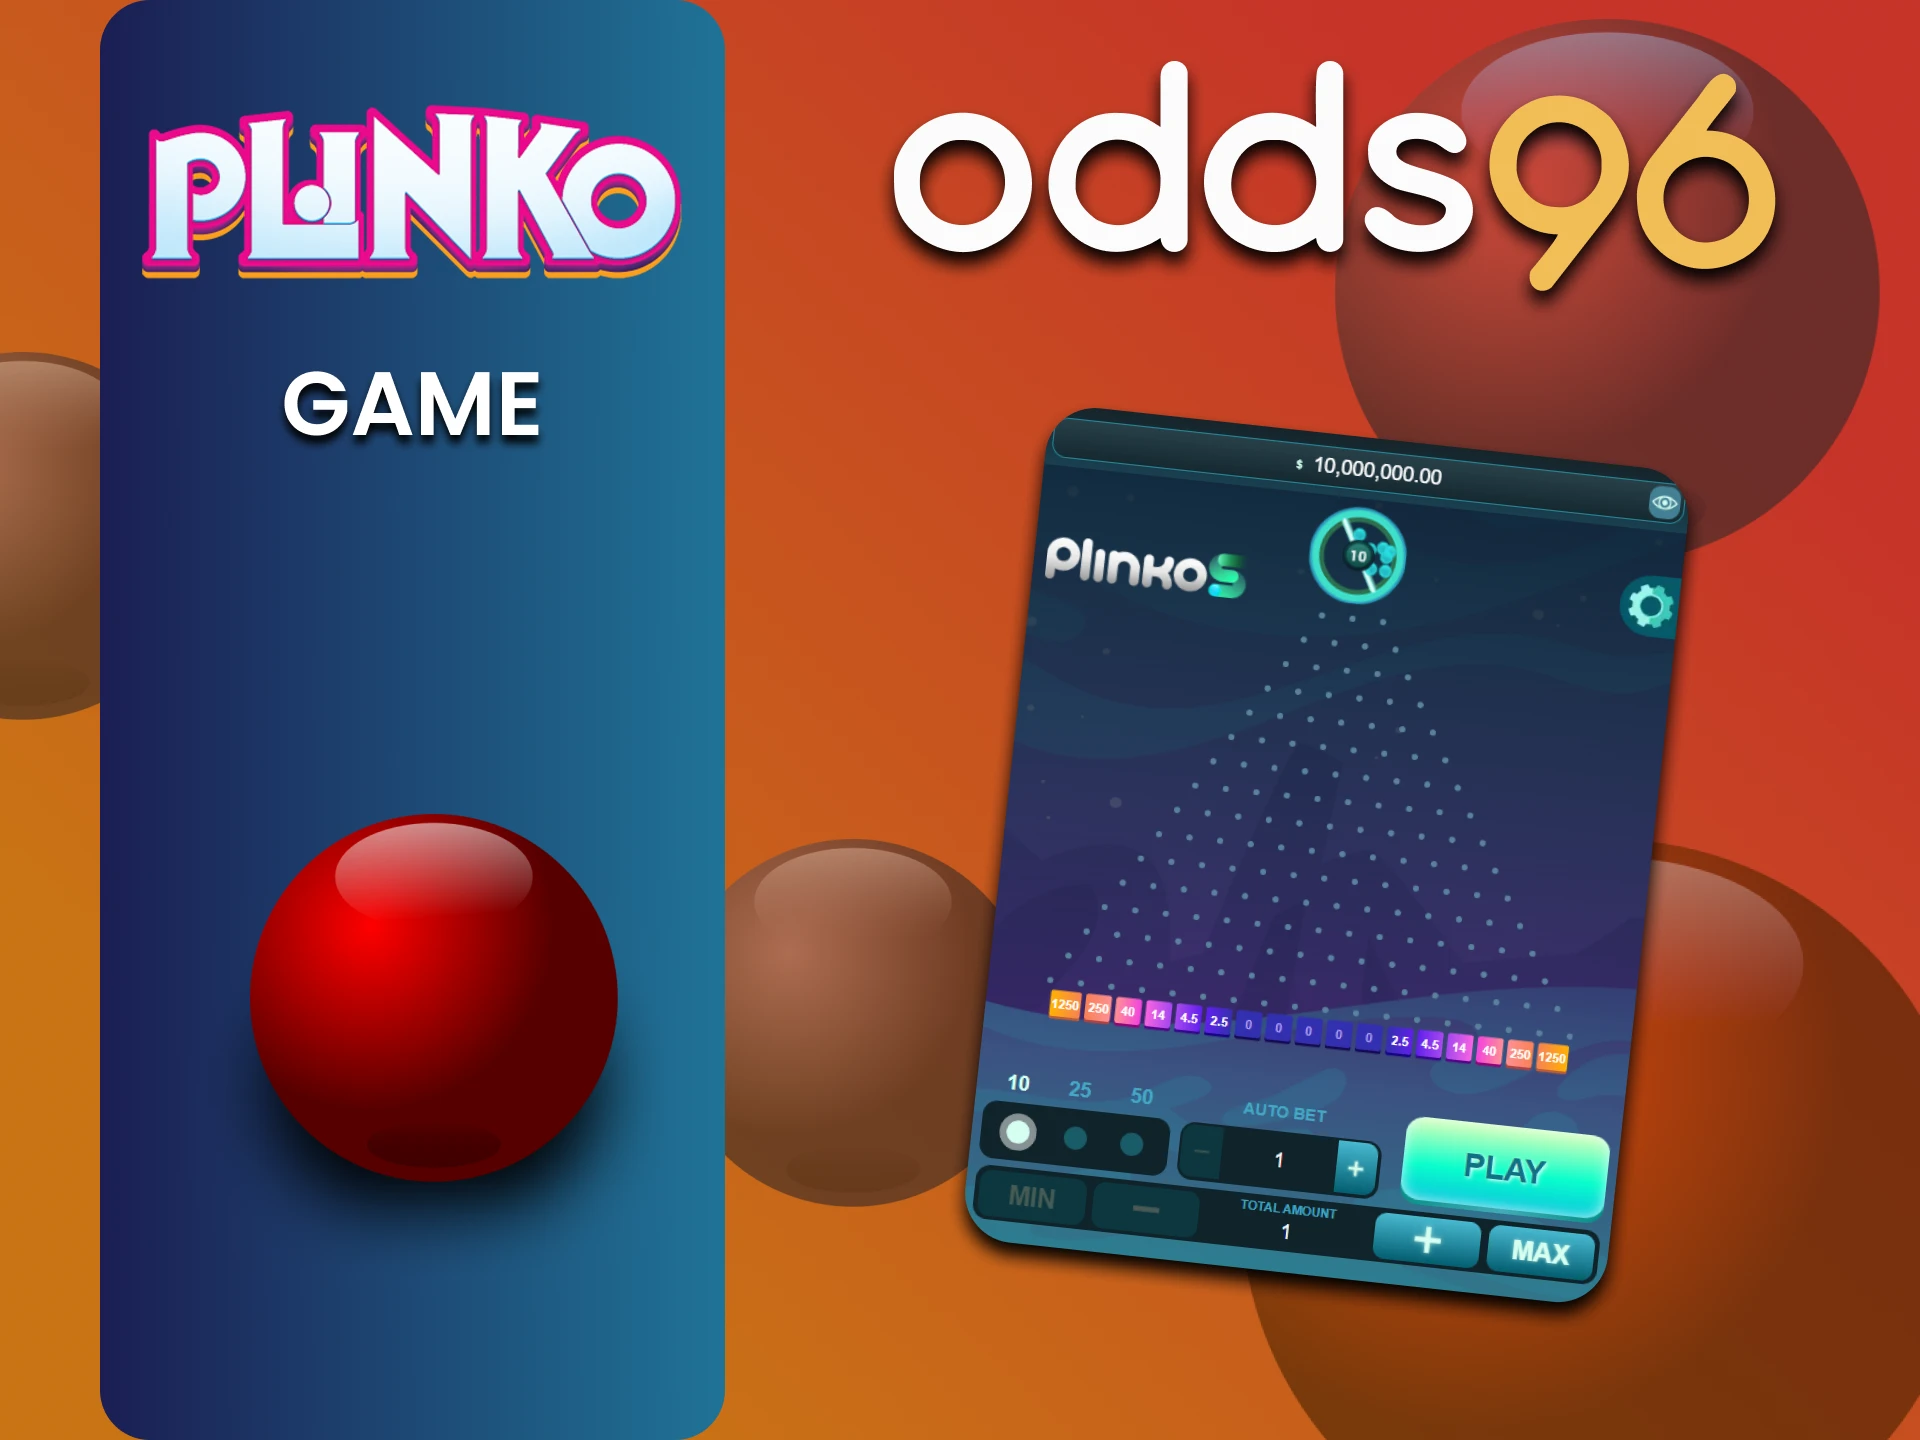 Find out all about the Plinko game at odds96.